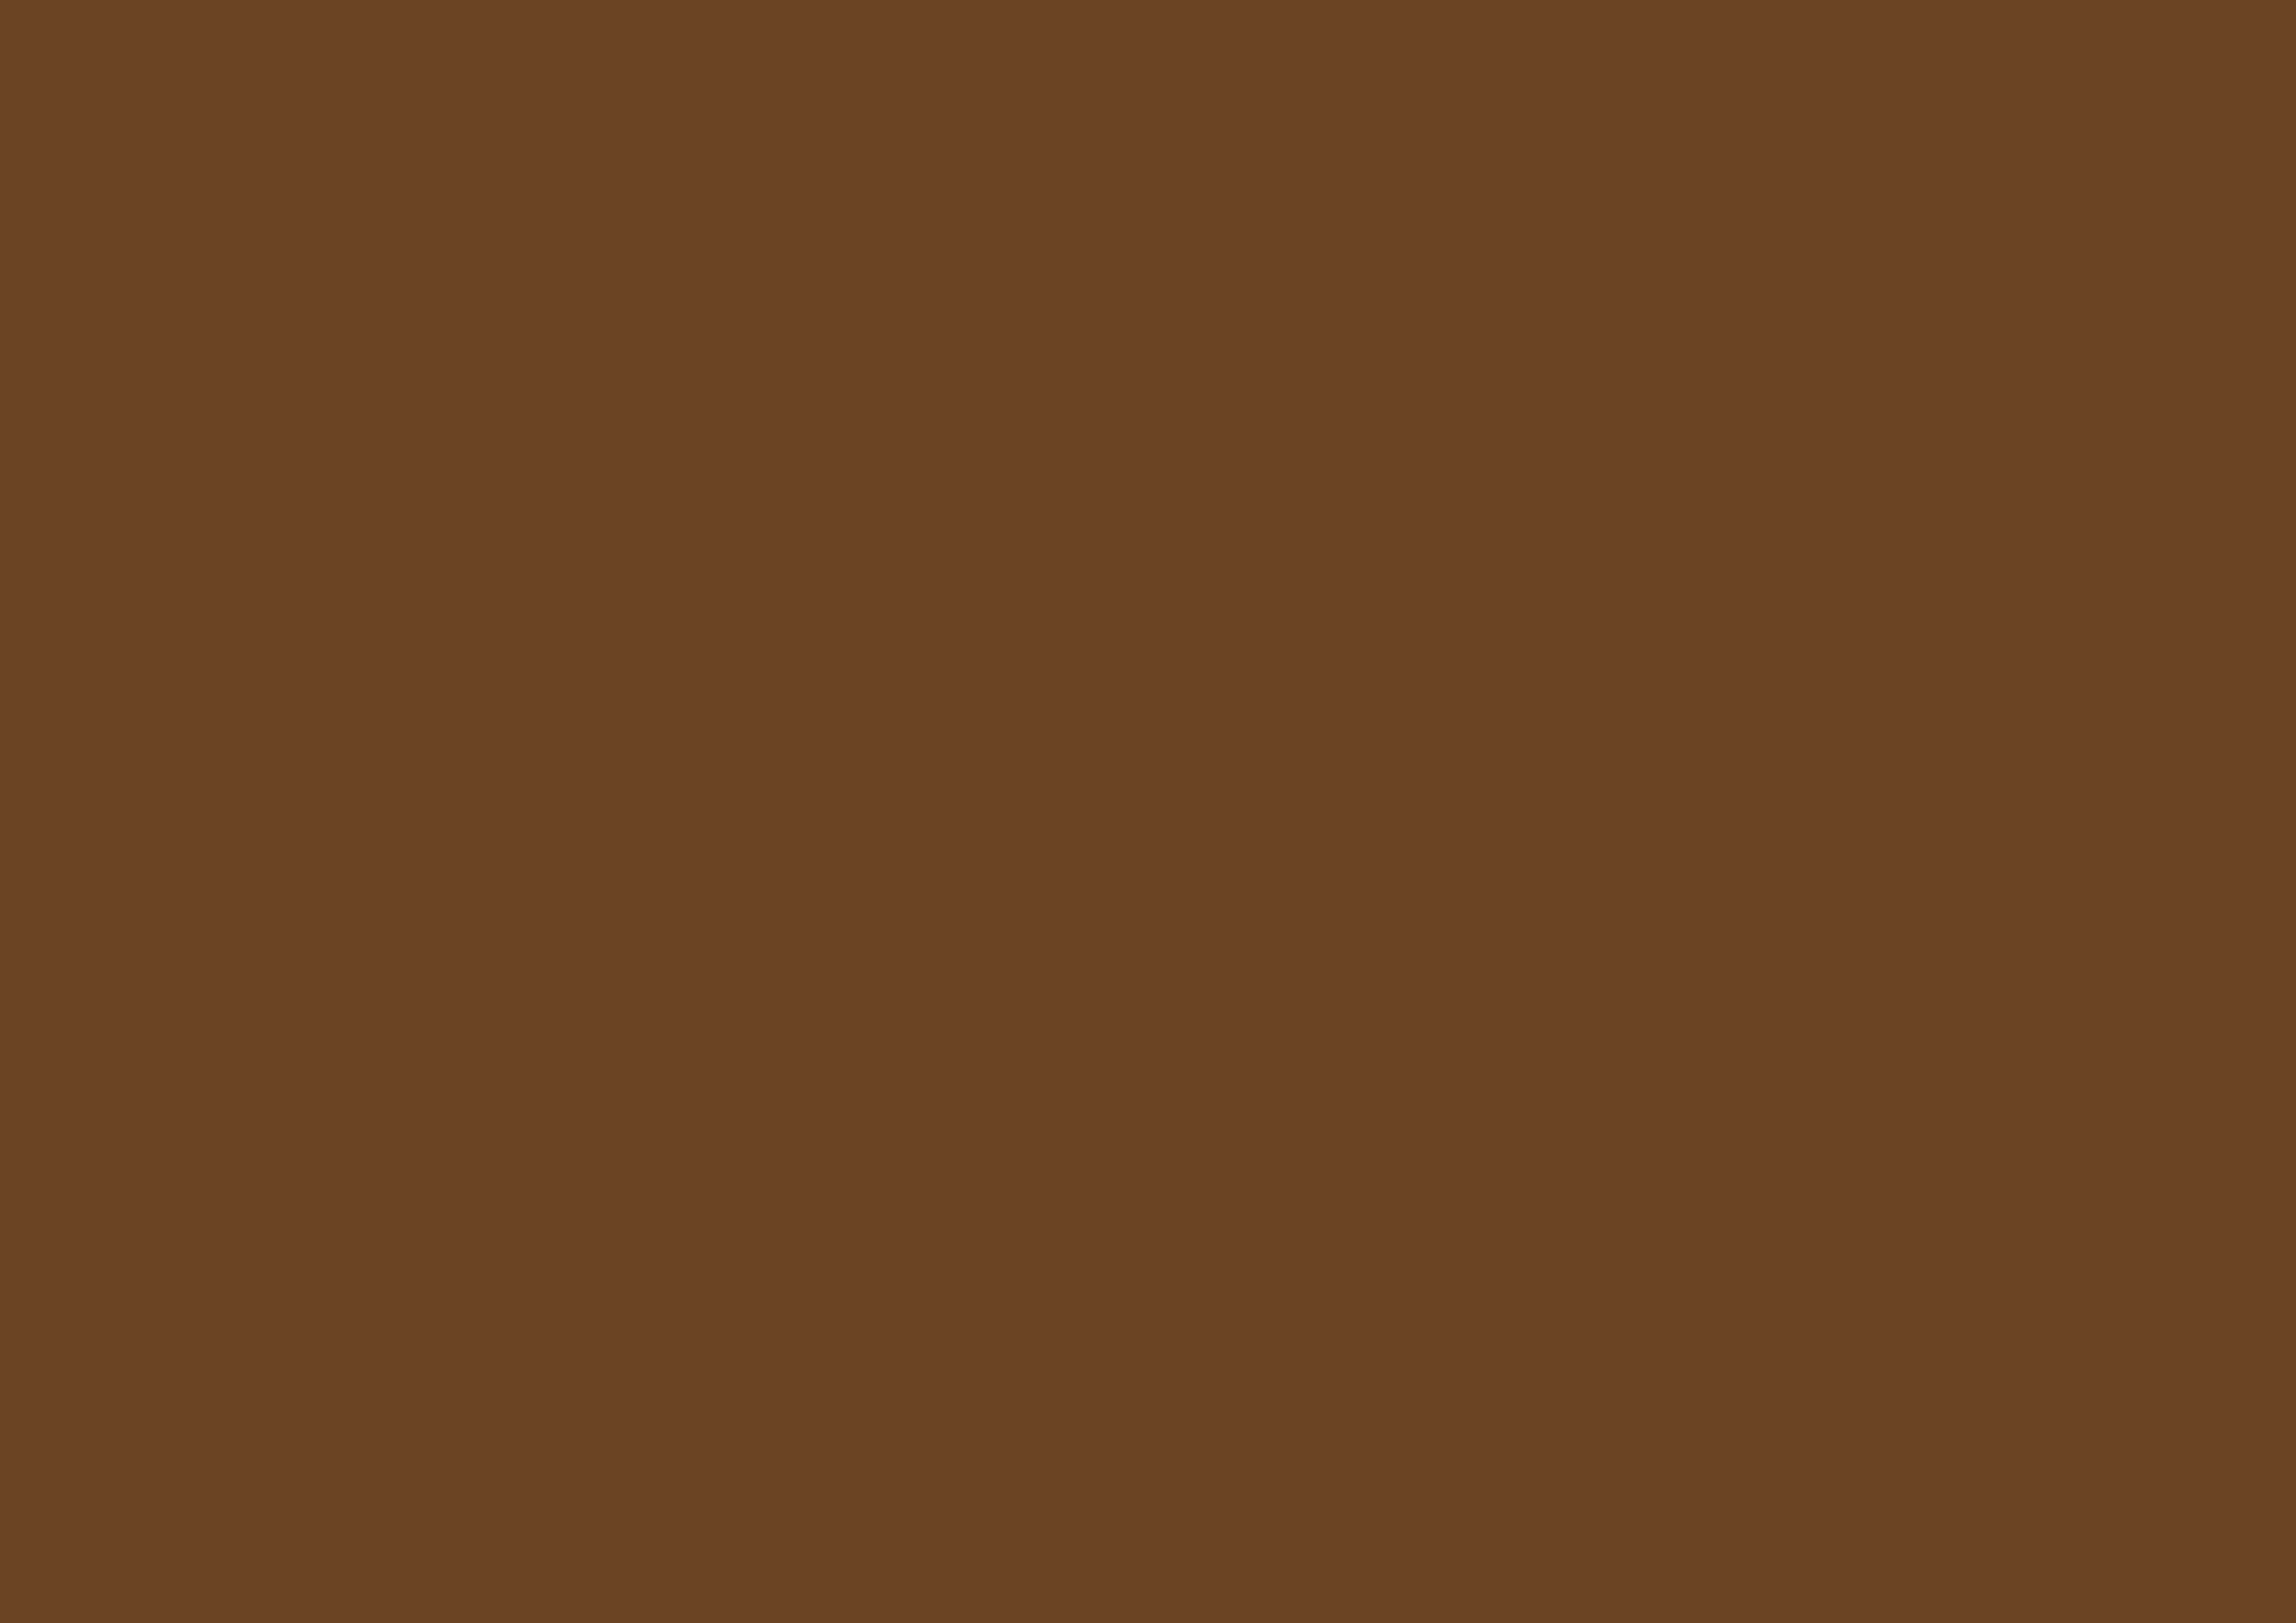 3508x2480 Brown-nose Solid Color Background